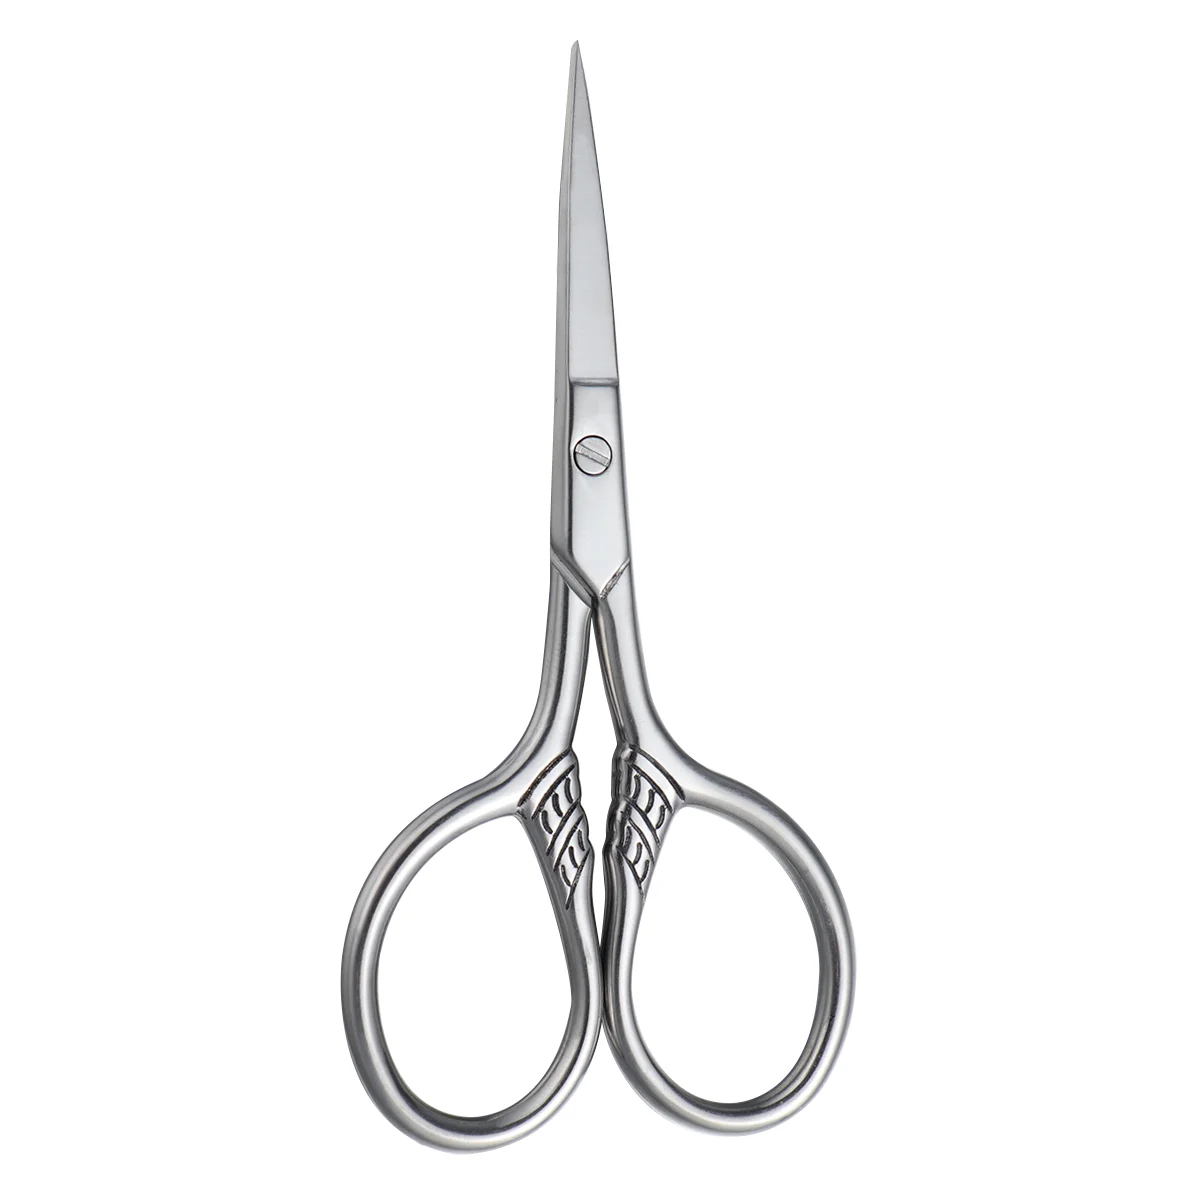 thinning and cutting hair scissors household 2cr 6 hairdressing shear styling tool sharp thinning scissor haircutting utensils Stainless Steel Nose Hair& Beard Trimming Mustache Trimming Shear Professional Hair Scissor Small Grooming for Men Silver